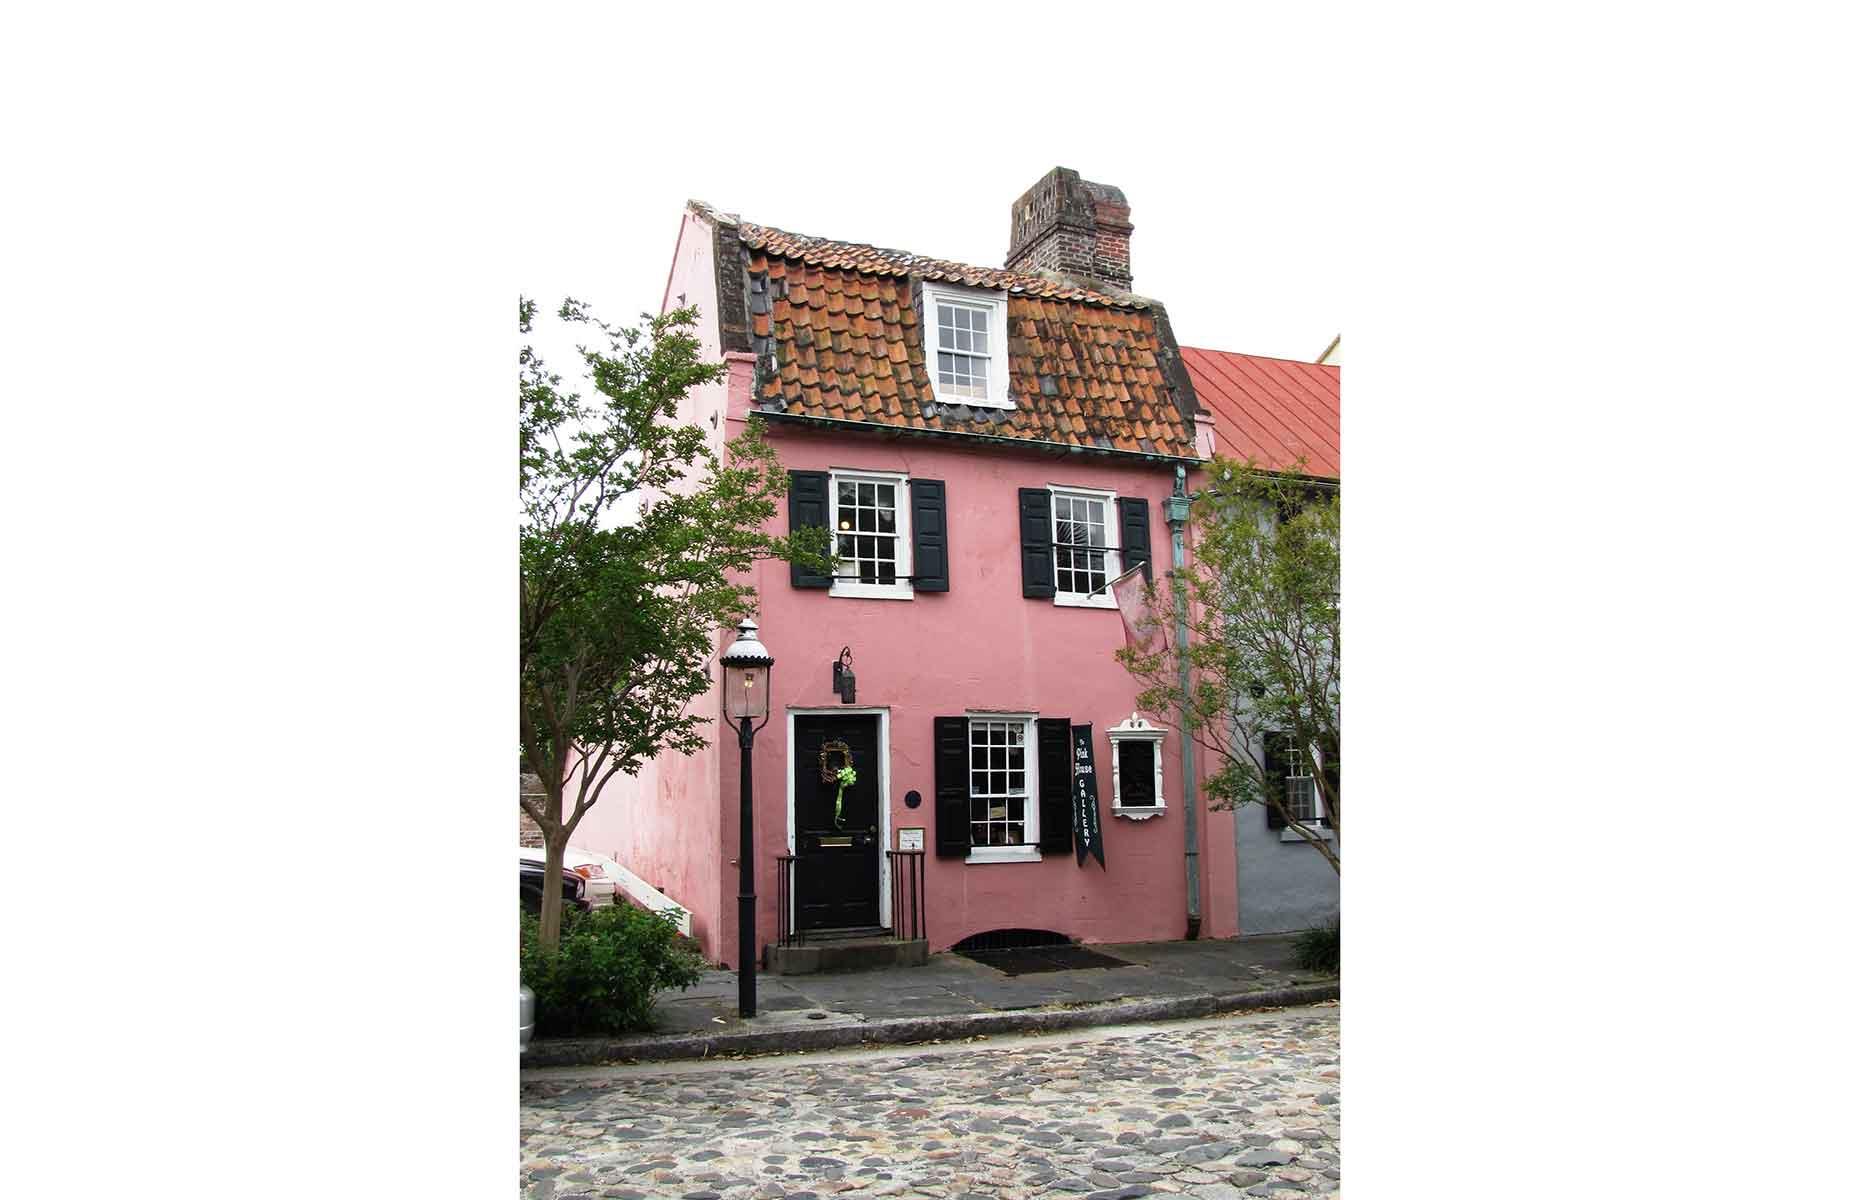 <p>With its original gambrel roof and surrounding cobblestone road, this petite palace really does make you feel as if you're walking the streets of France. This is the <a href="https://chstoday.6amcity.com/history-of-the-pink-house-17-chalmers-st-in-charleston-sc">Pink House</a>, located in Charleston's French Quarter, built in 1690 as a tavern (and brothel). It has since been used as a law office, private residence and now an <a href="http://pinkhousegallery.tripod.com/">art gallery</a>, with one room on each of its three floors. There's talk of it returning to a private residence again, so see it while you can – but if you do miss out its photogenic exterior and plaque make a visit worthwhile.</p>